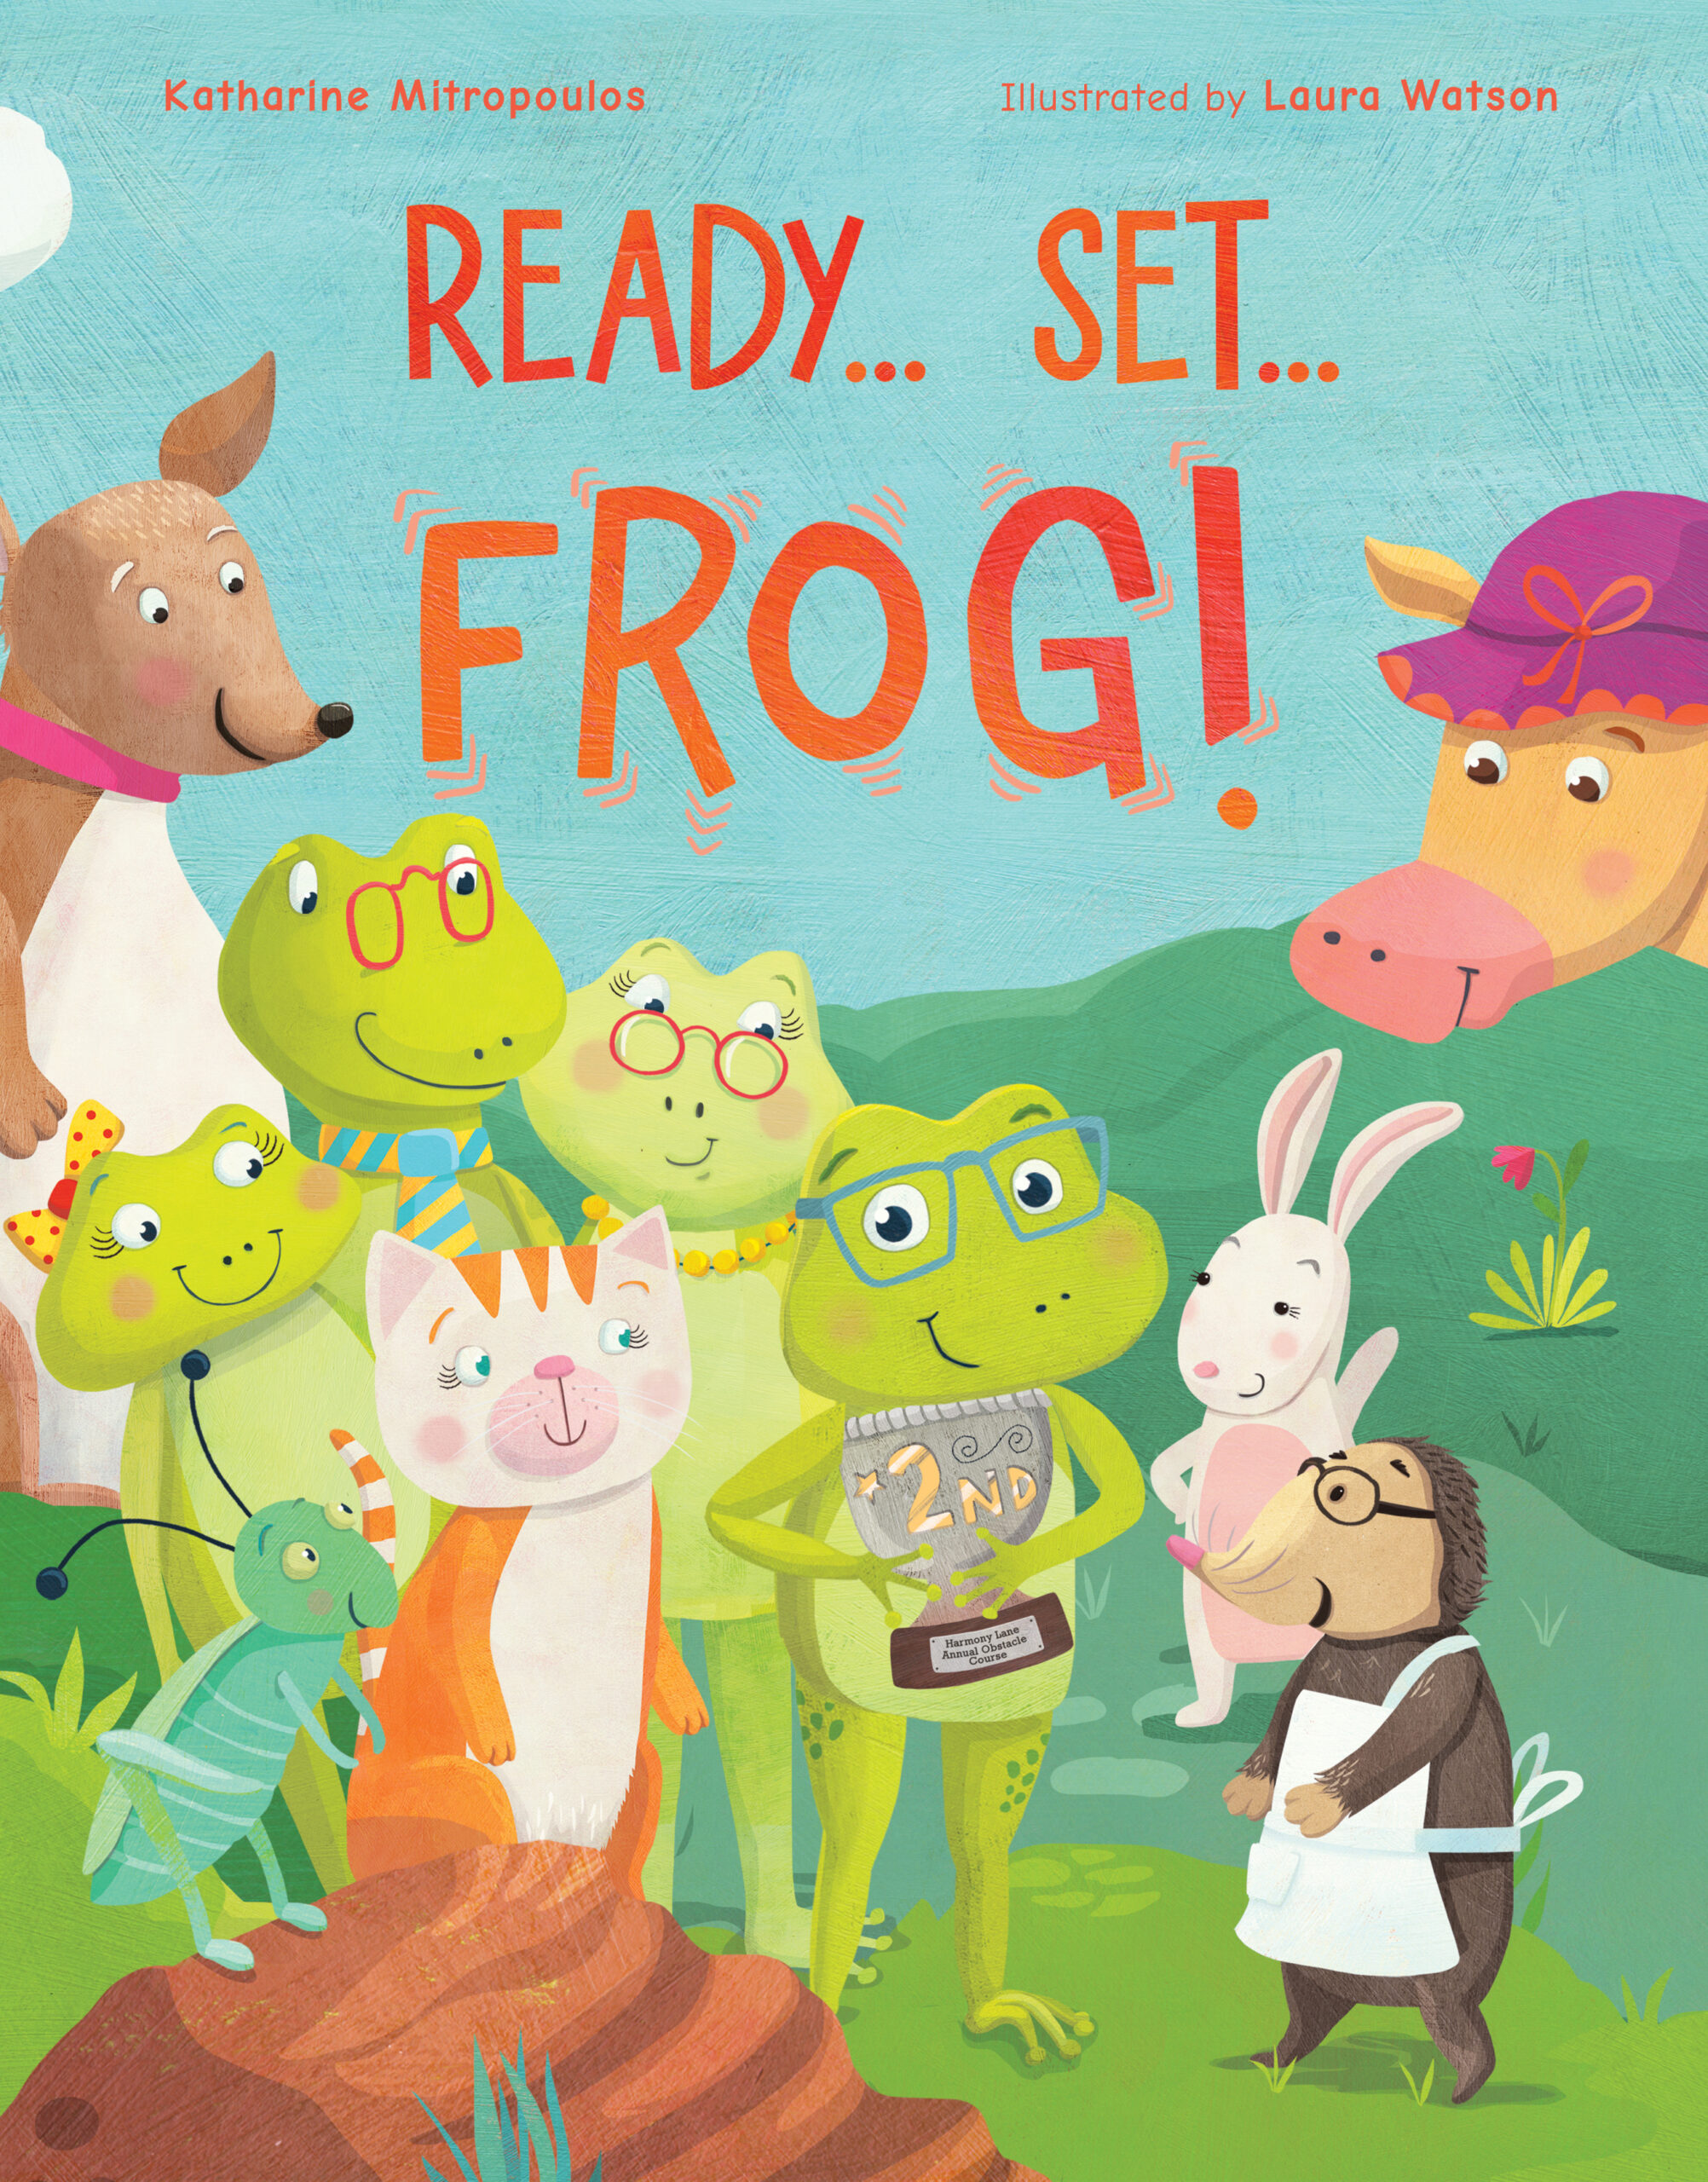 Ready... Set... Frog! by Katharine Mitropoulos